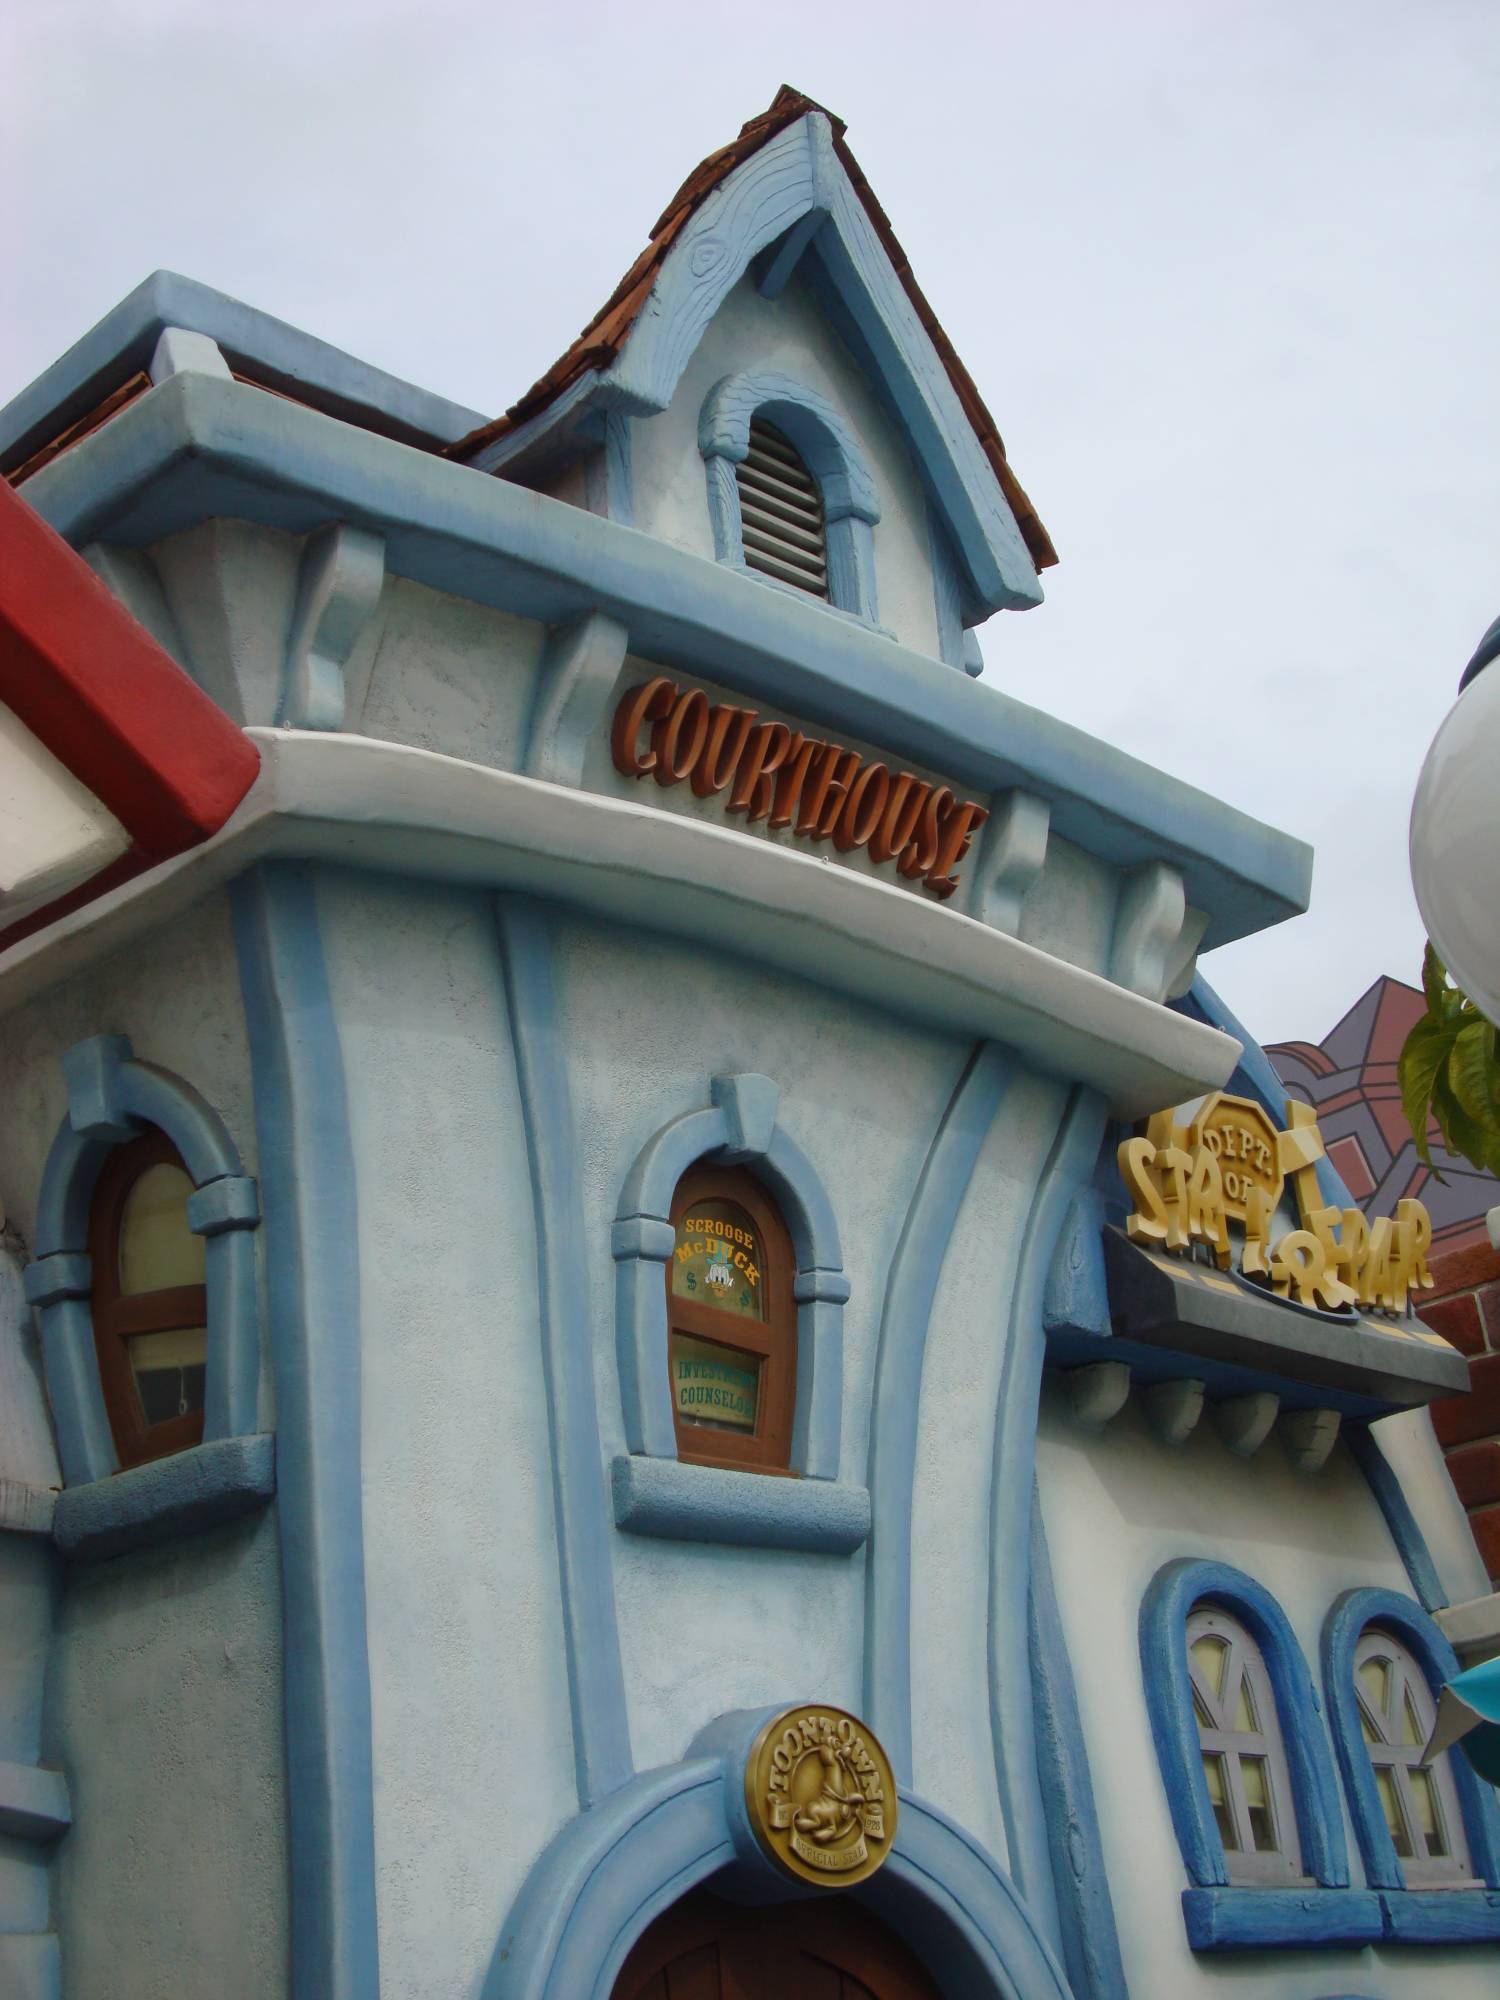 Toontown - Courthouse